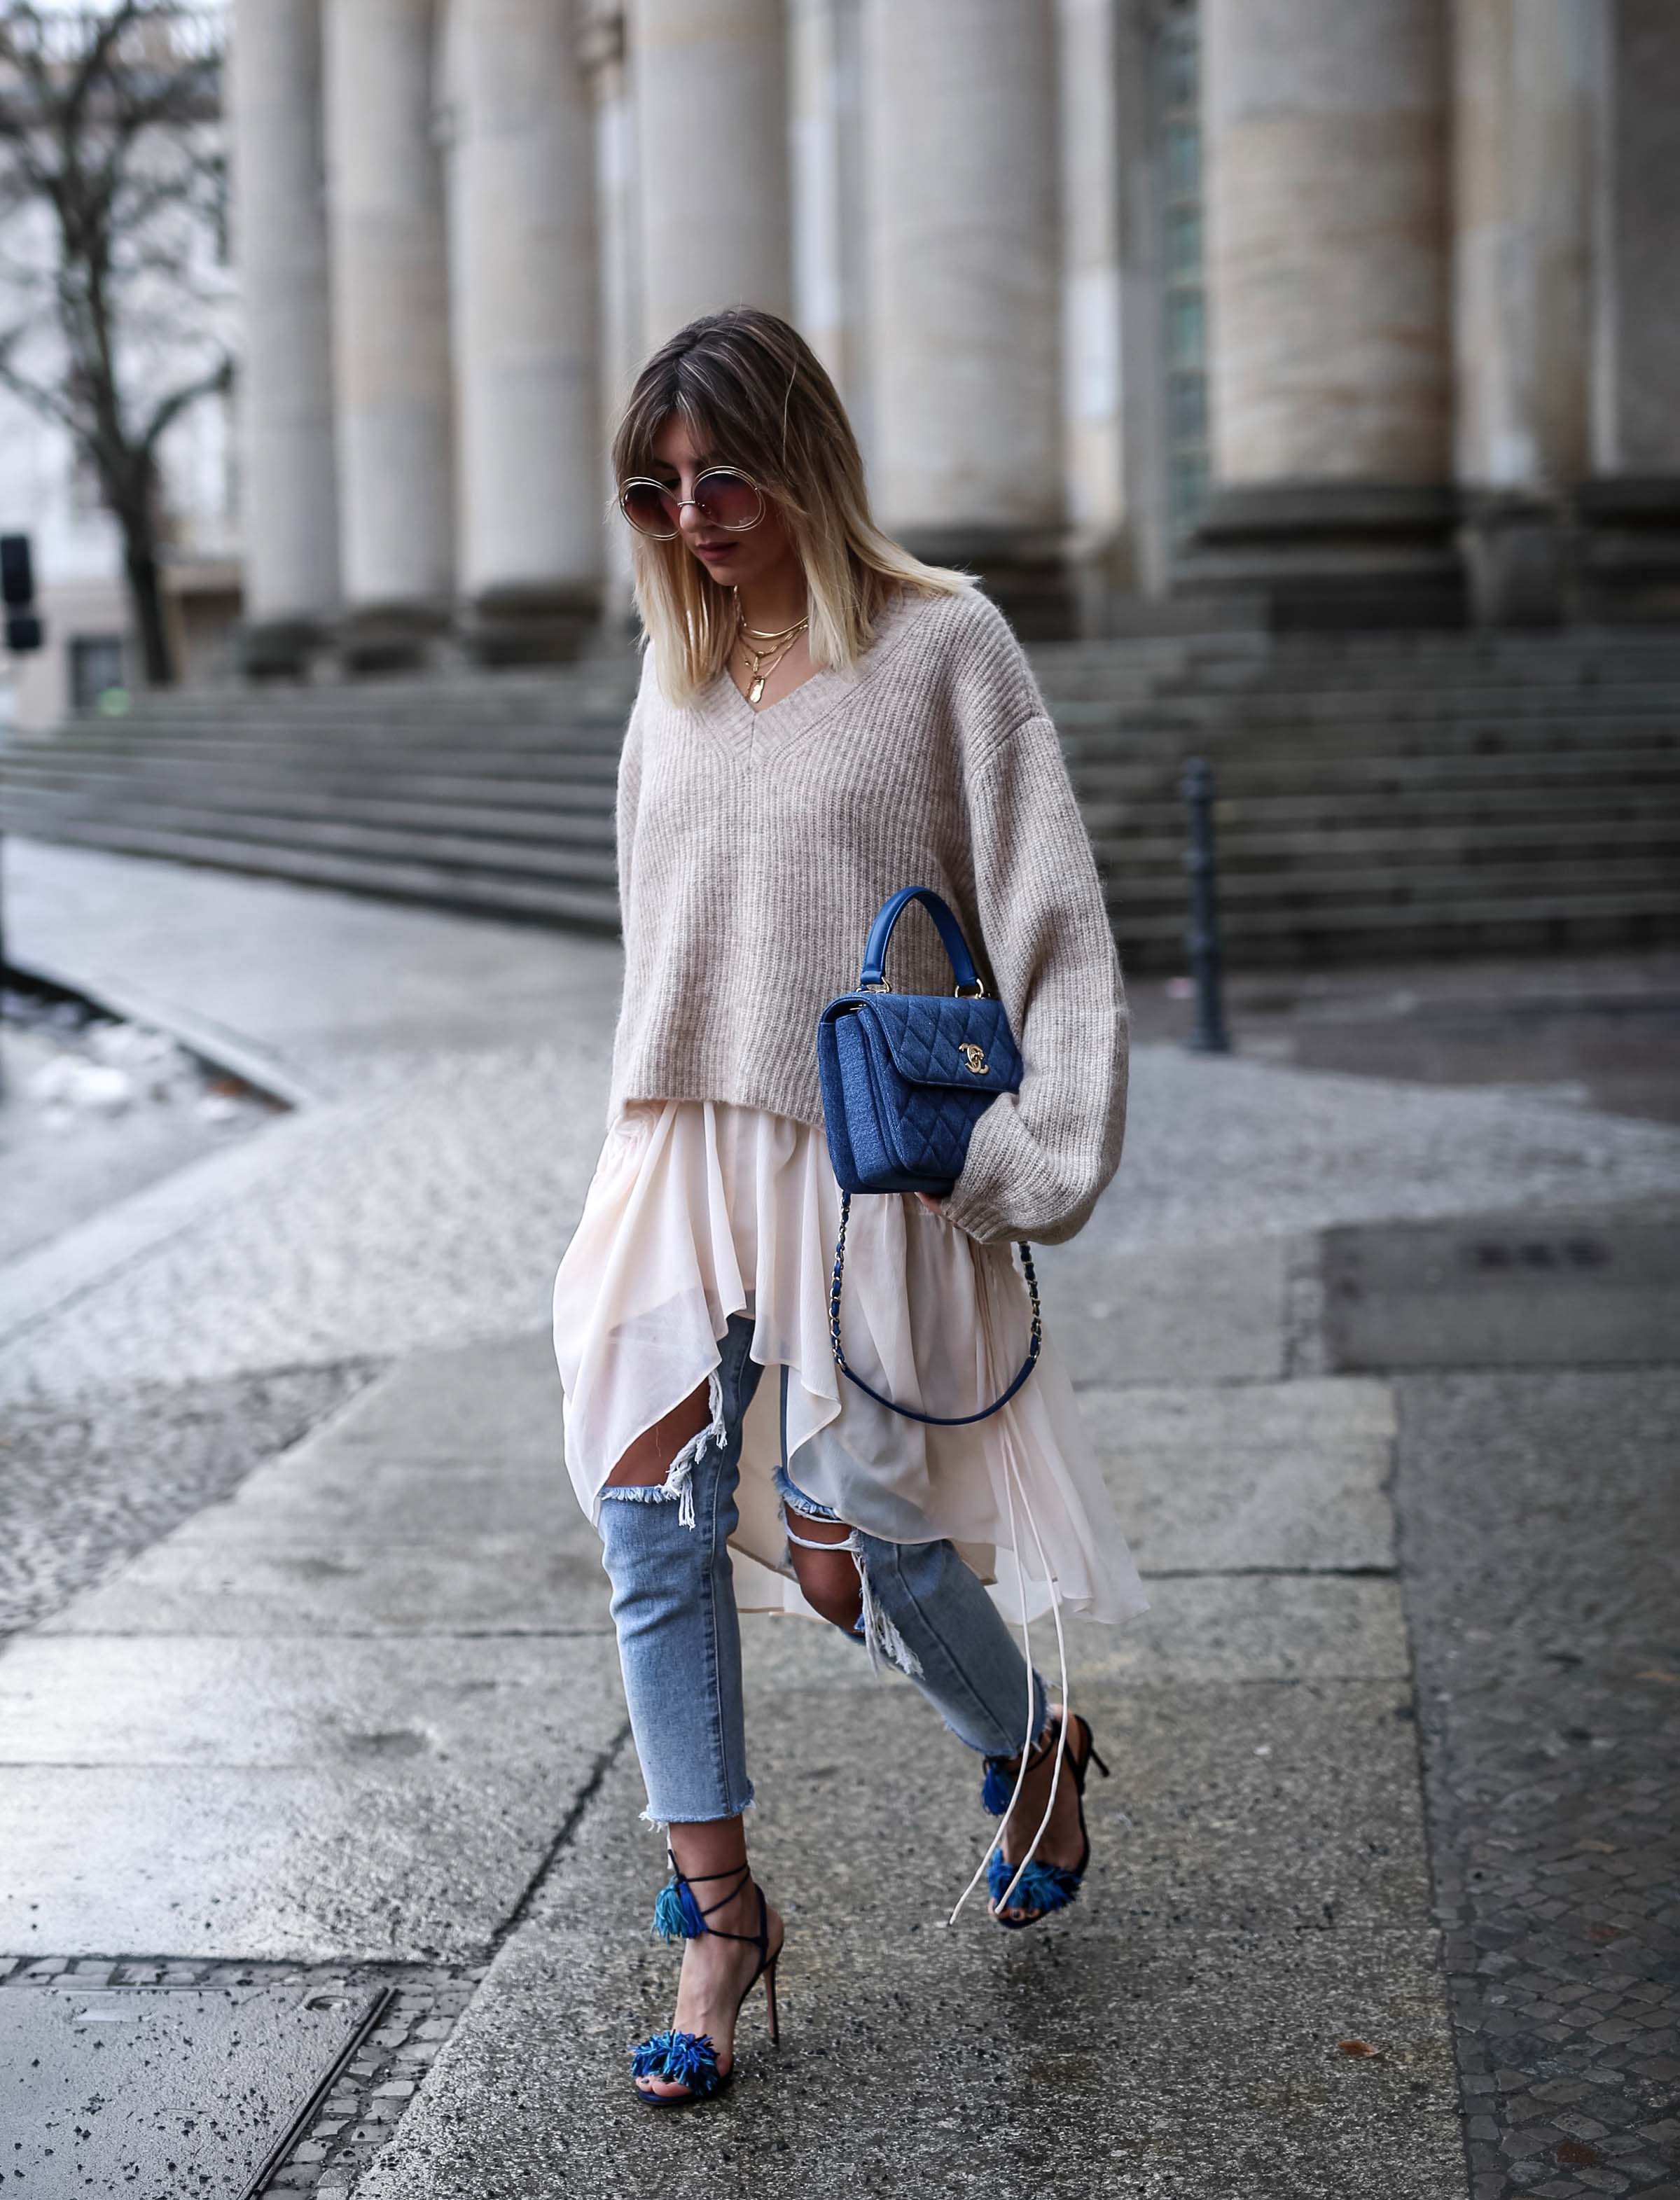 Recreate these Effortless Outfits for NOW + LATER